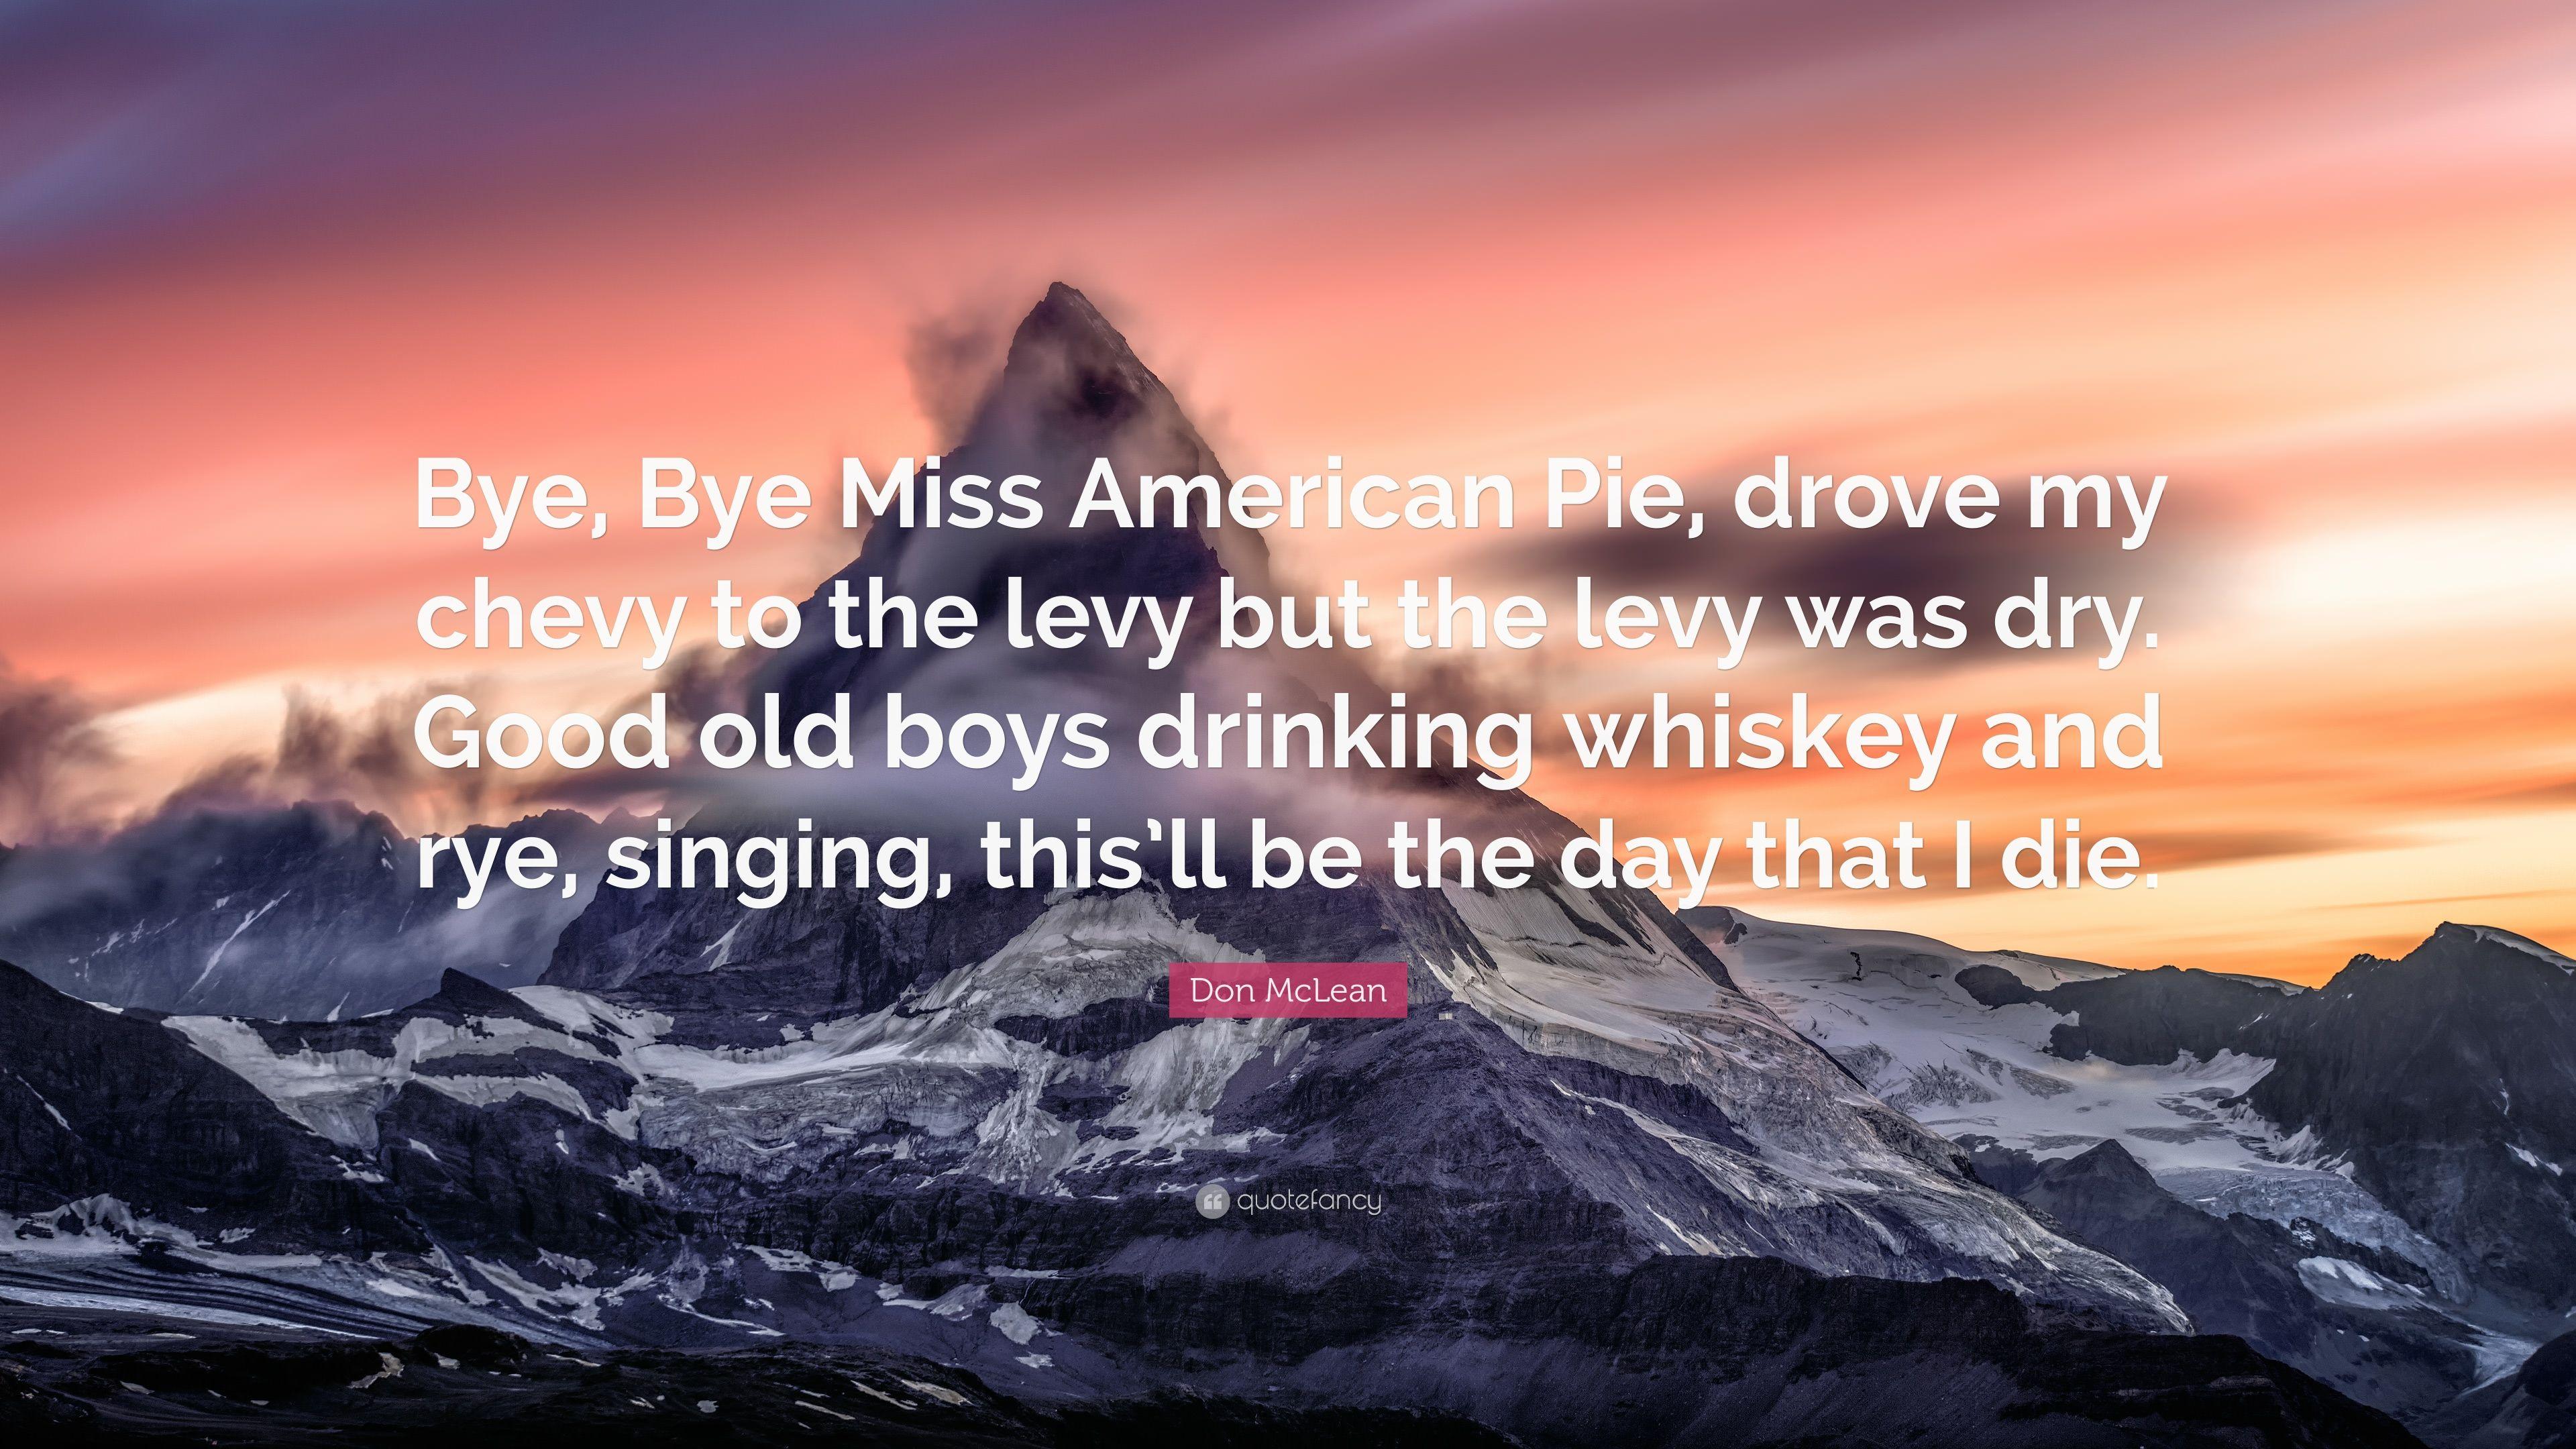 Don McLean Quote: “Bye, Bye Miss American Pie, drove my